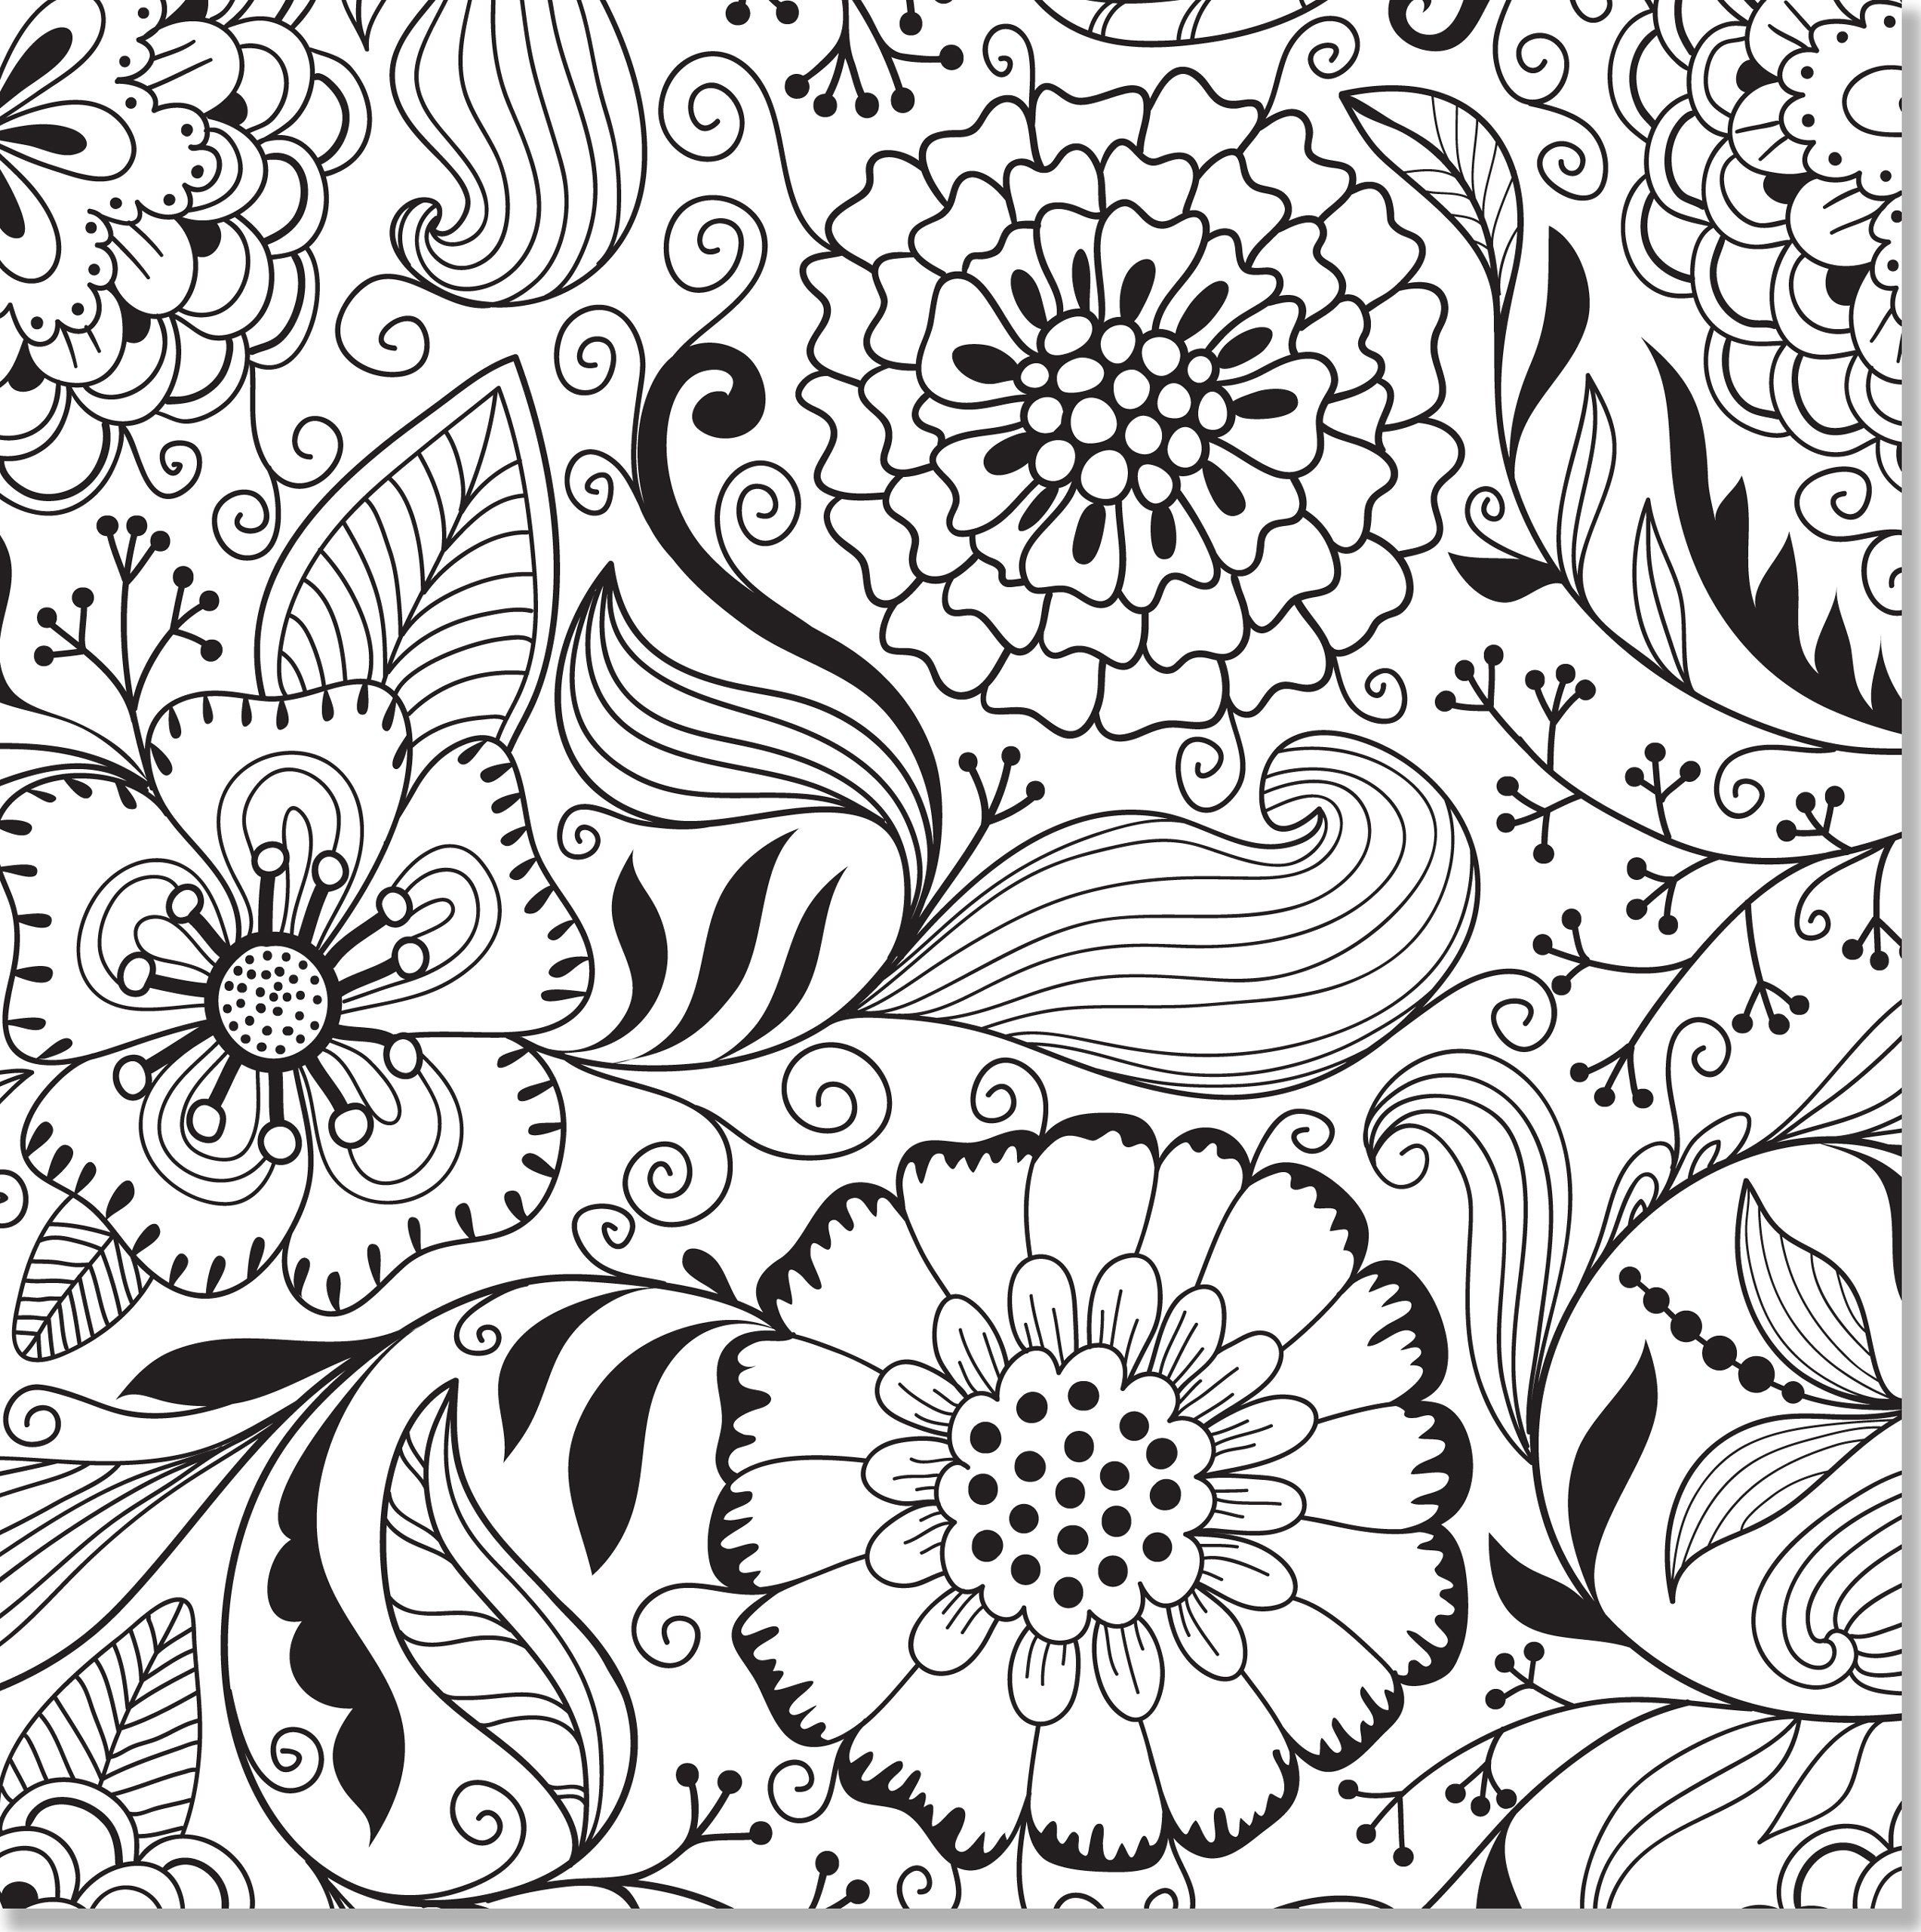 Butterfly And Flower Coloring Pages For Adults Free Printable - Free Printable Flower Coloring Pages For Adults